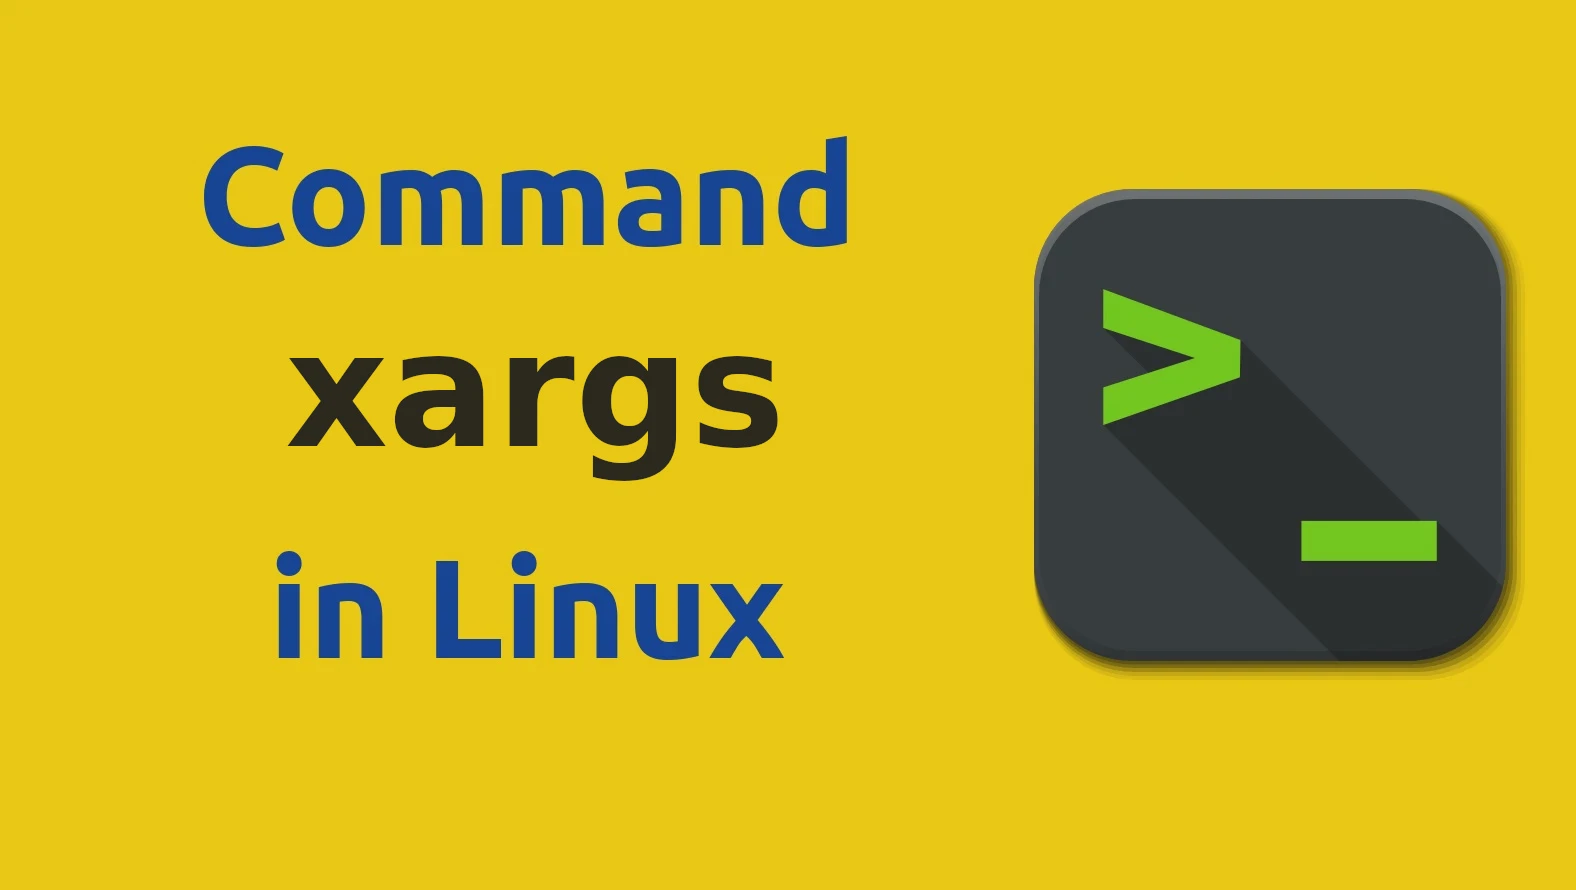 How to use xargs command in Linux